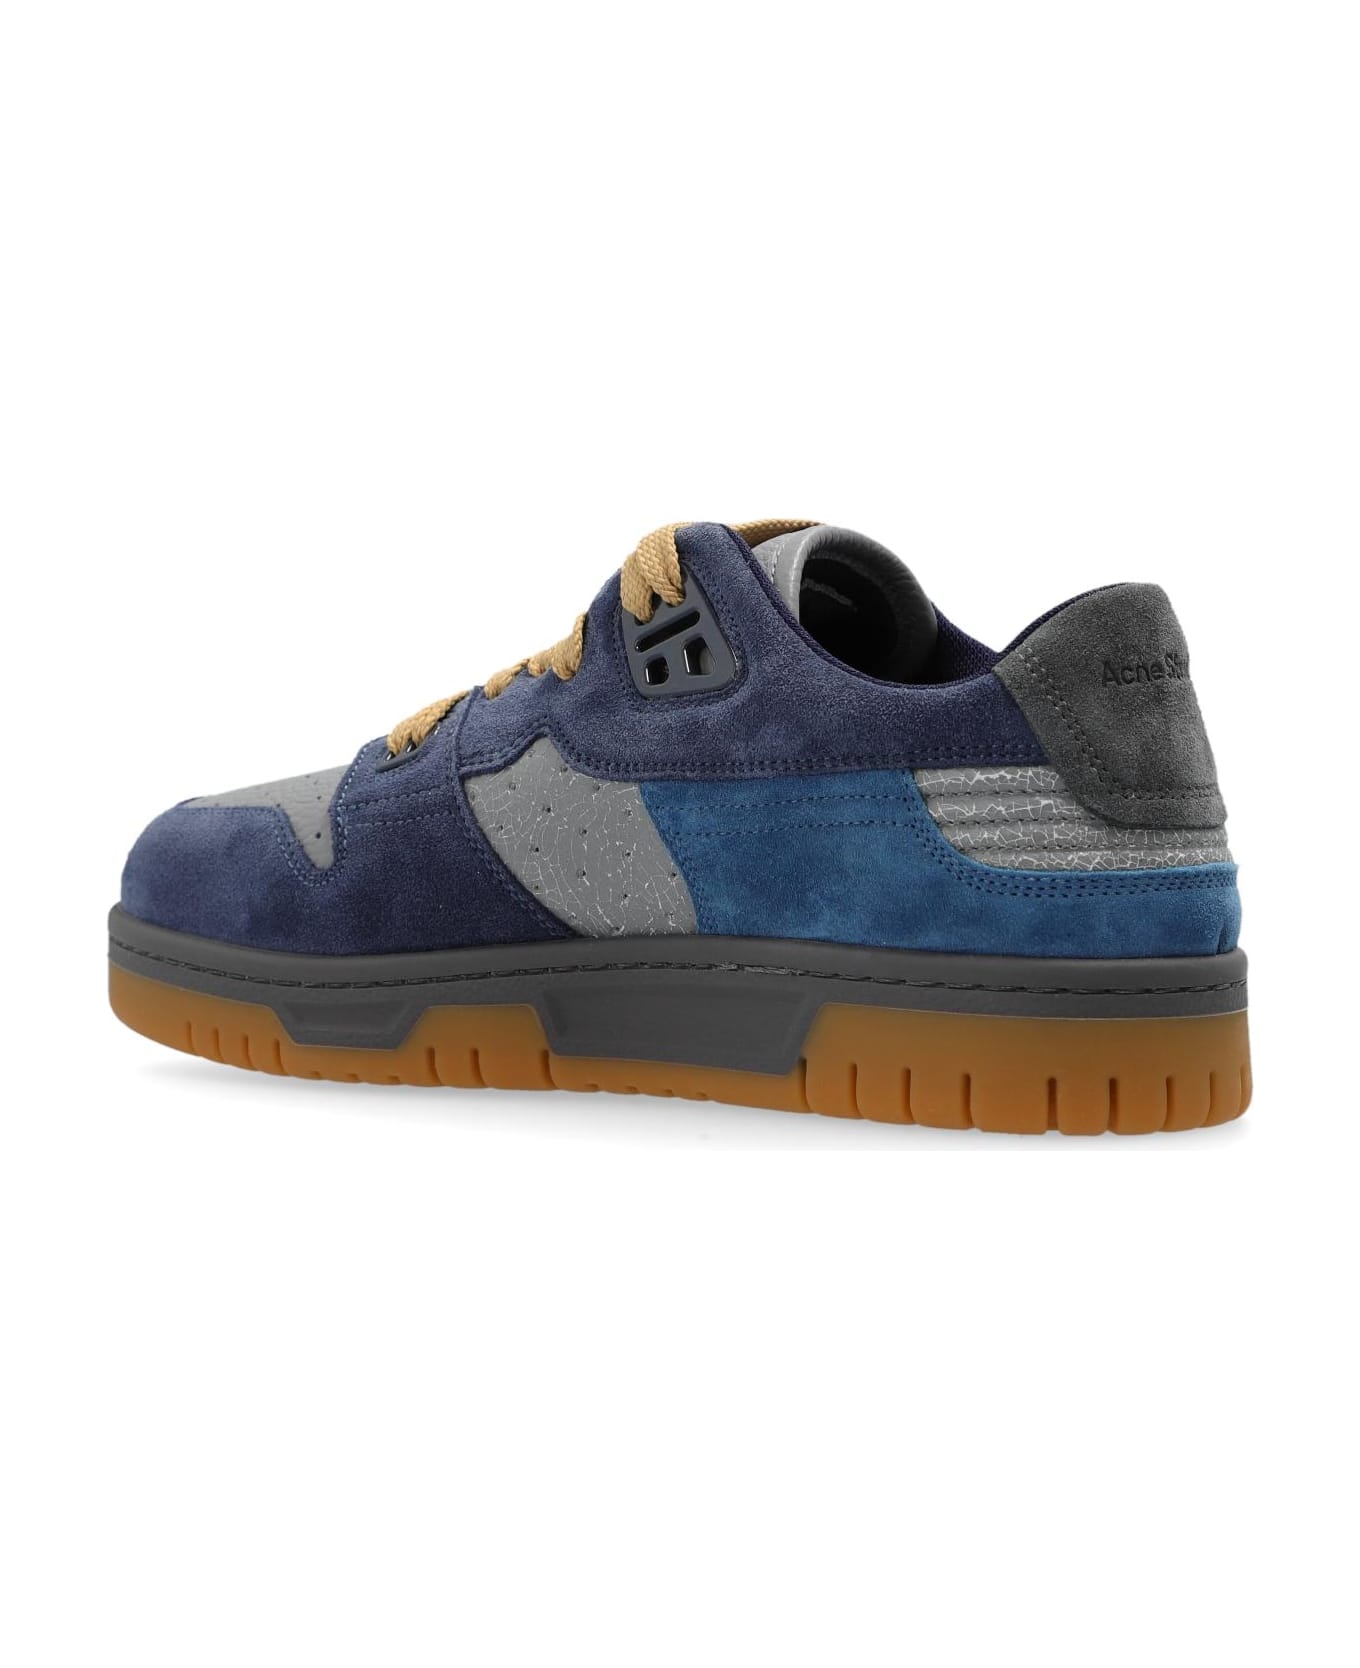 Acne Studios Leather Sneakers - Afs Grey/blue スニーカー